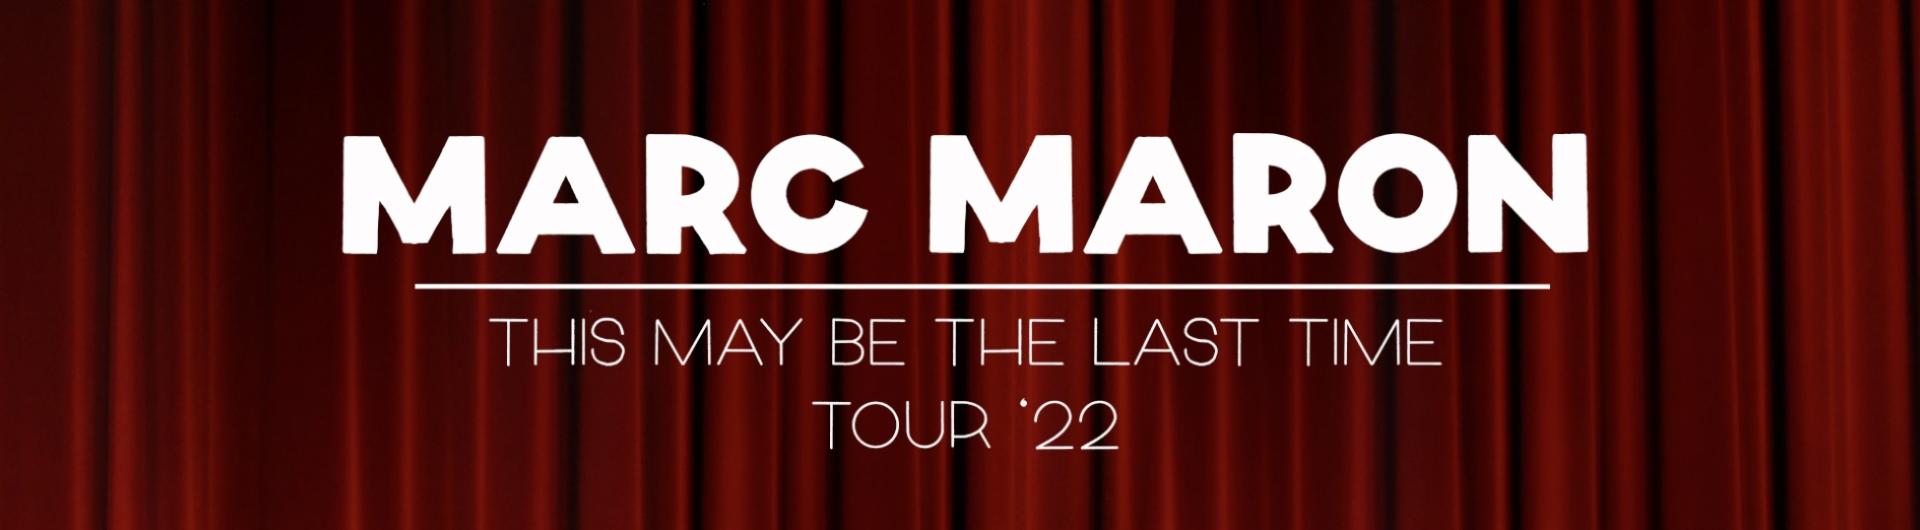 Against a background of curtains are the words "Marc Maron This May Be The Last Time Tour '22"